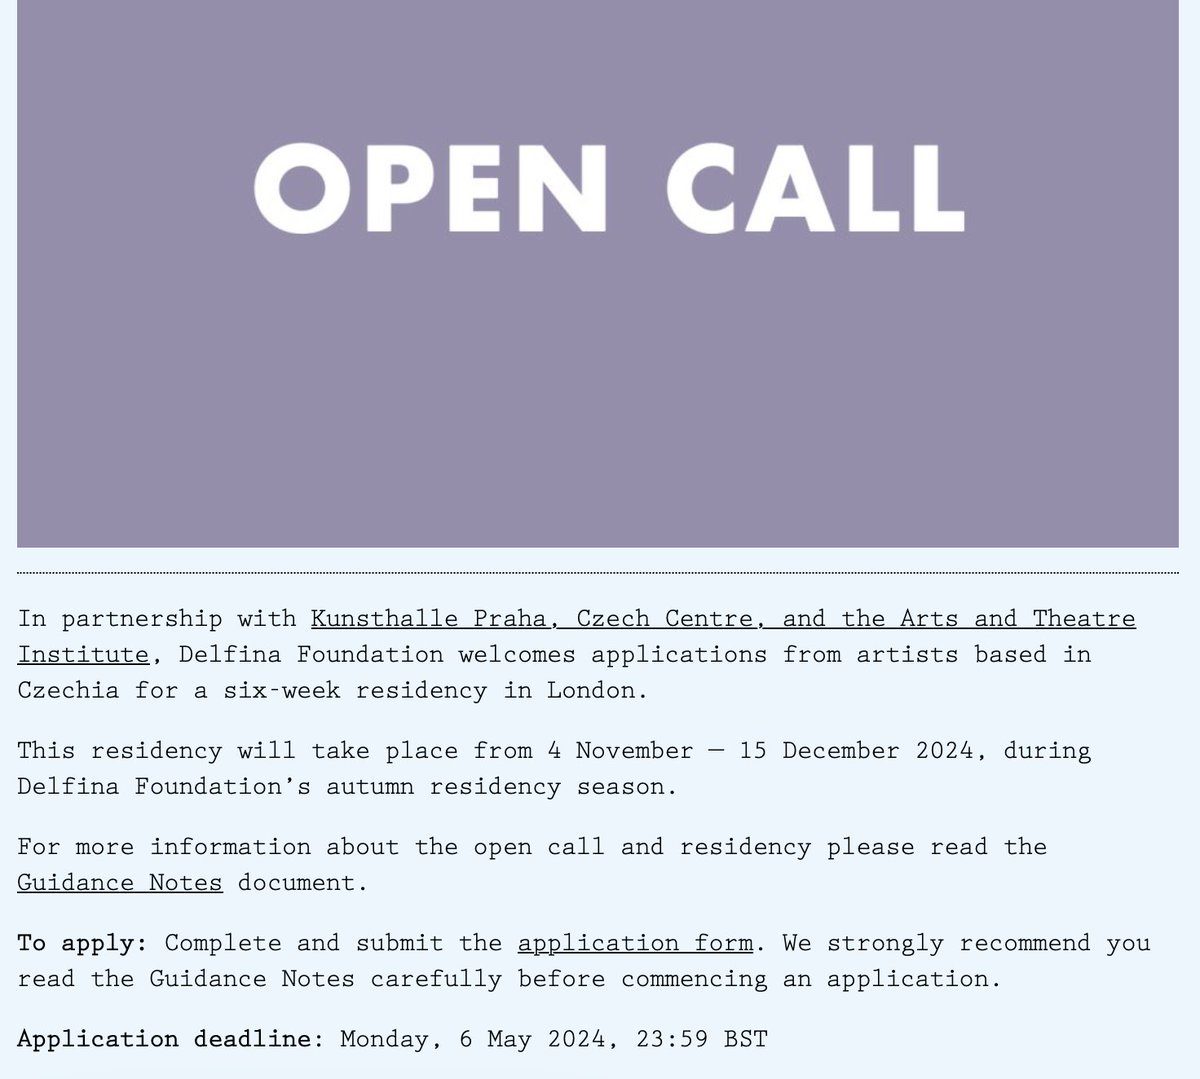 OPEN CALL FOR ARTISTS BASED IN CZECHIA: London's @delfinafdn welcomes applications from artists based in Czechia for a six-week residency in London from 4 Nov to 15 Dec 2024. CLOSES 6 MAY, 2024 delfinafoundation.com/open-calls/cur…